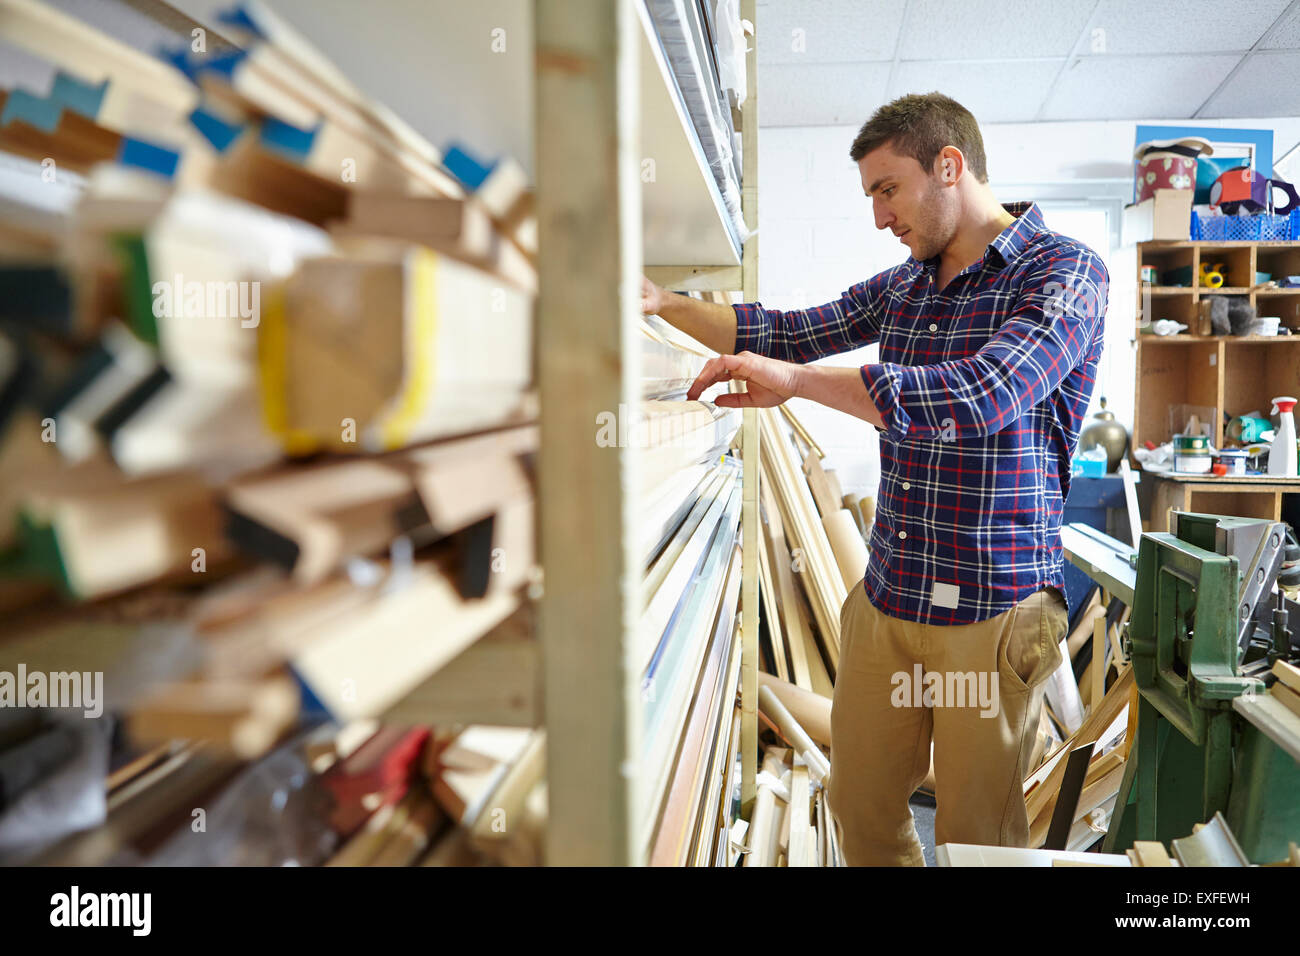 Mid adult man searching stockroom shelves in picture framers workshop Stock Photo